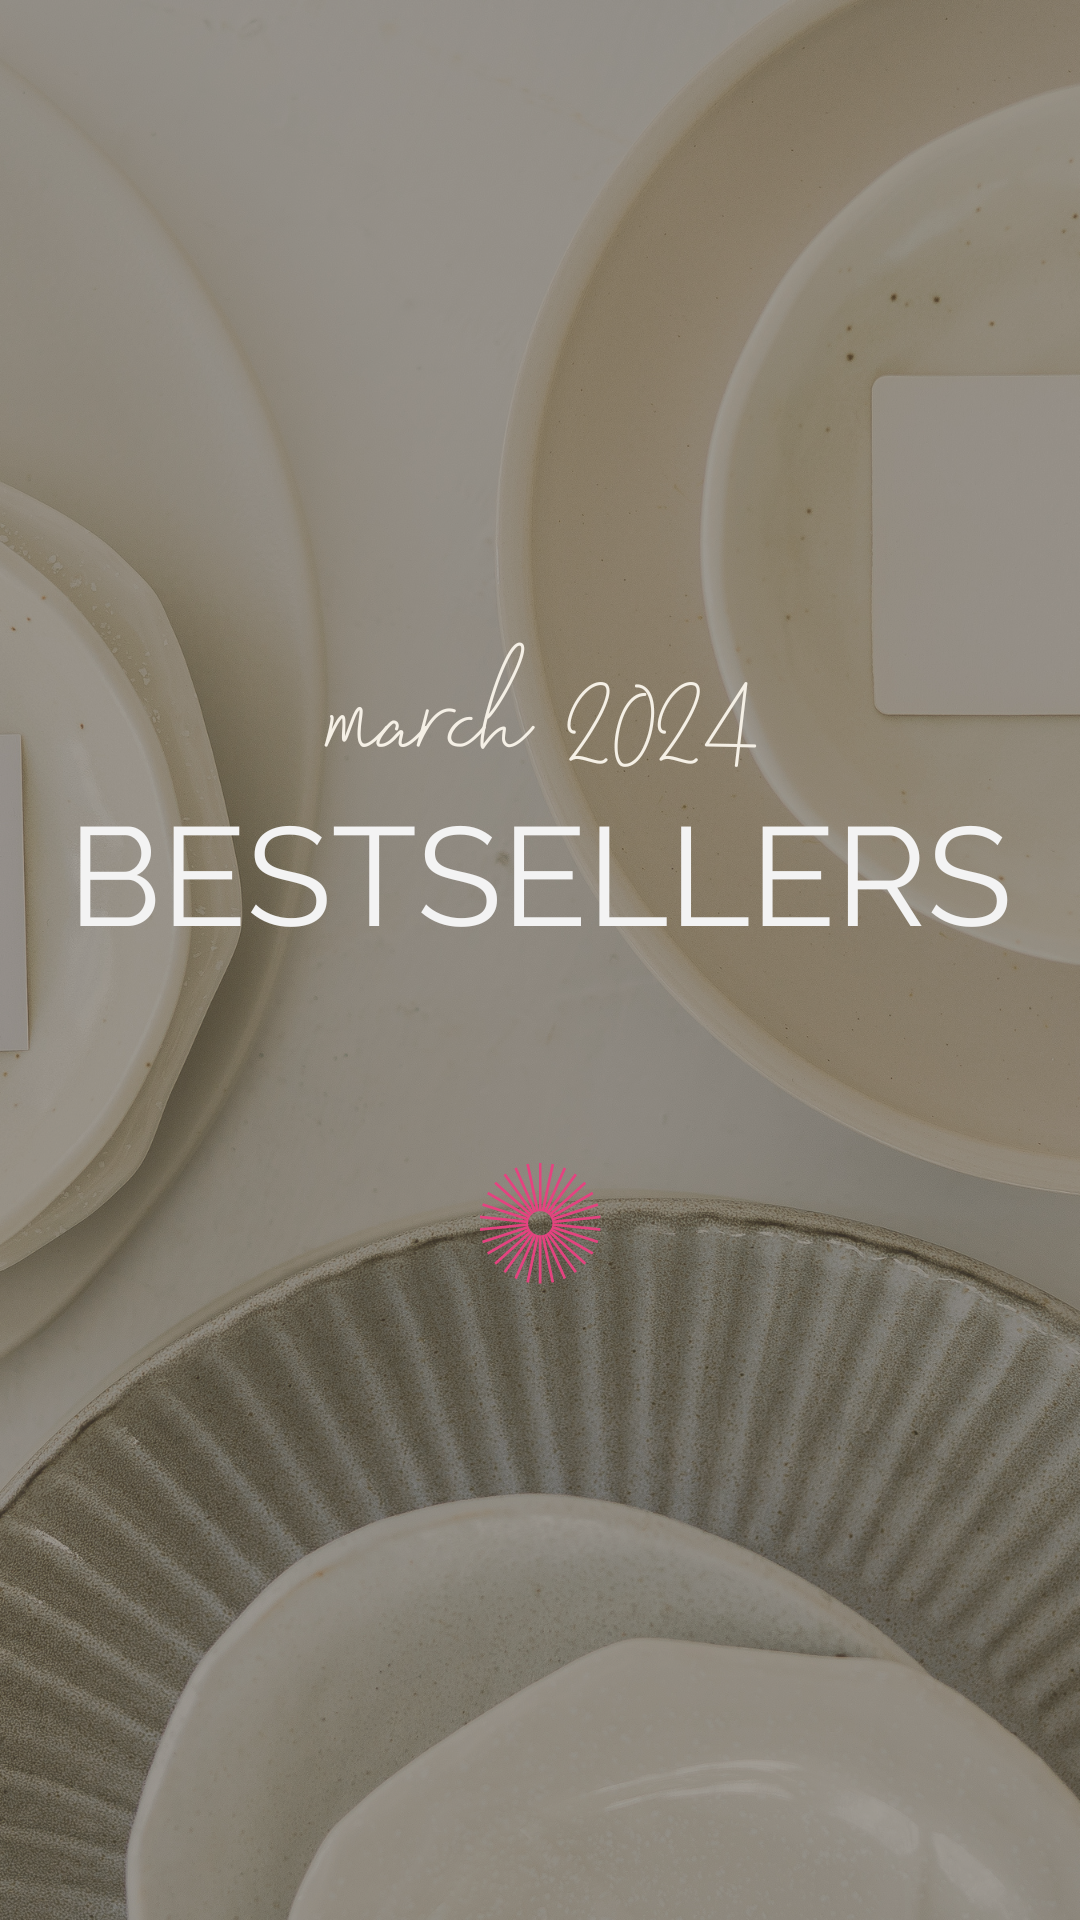 Beige plates in a background with text overlay "March 2024 Bestsellers".